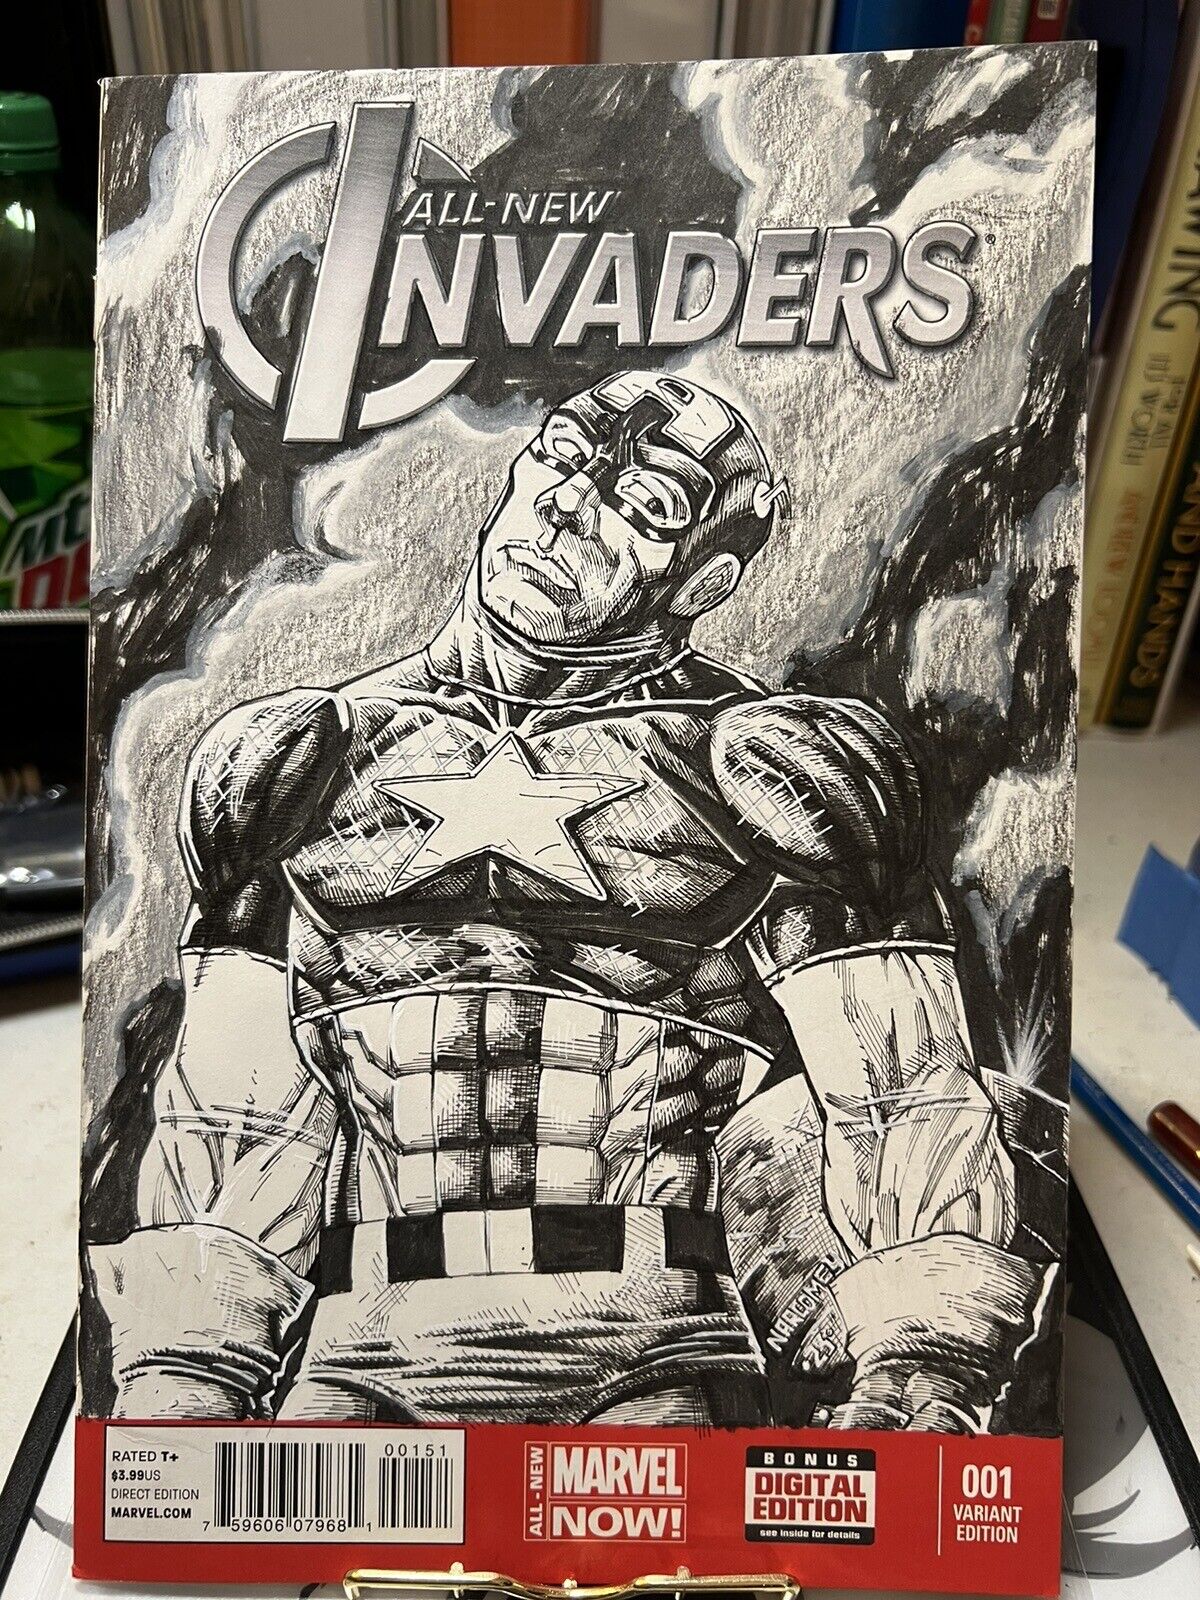 Invaders, All New 001, Sketch Cover CAPTAIN AMERICA art by NARCOMEY